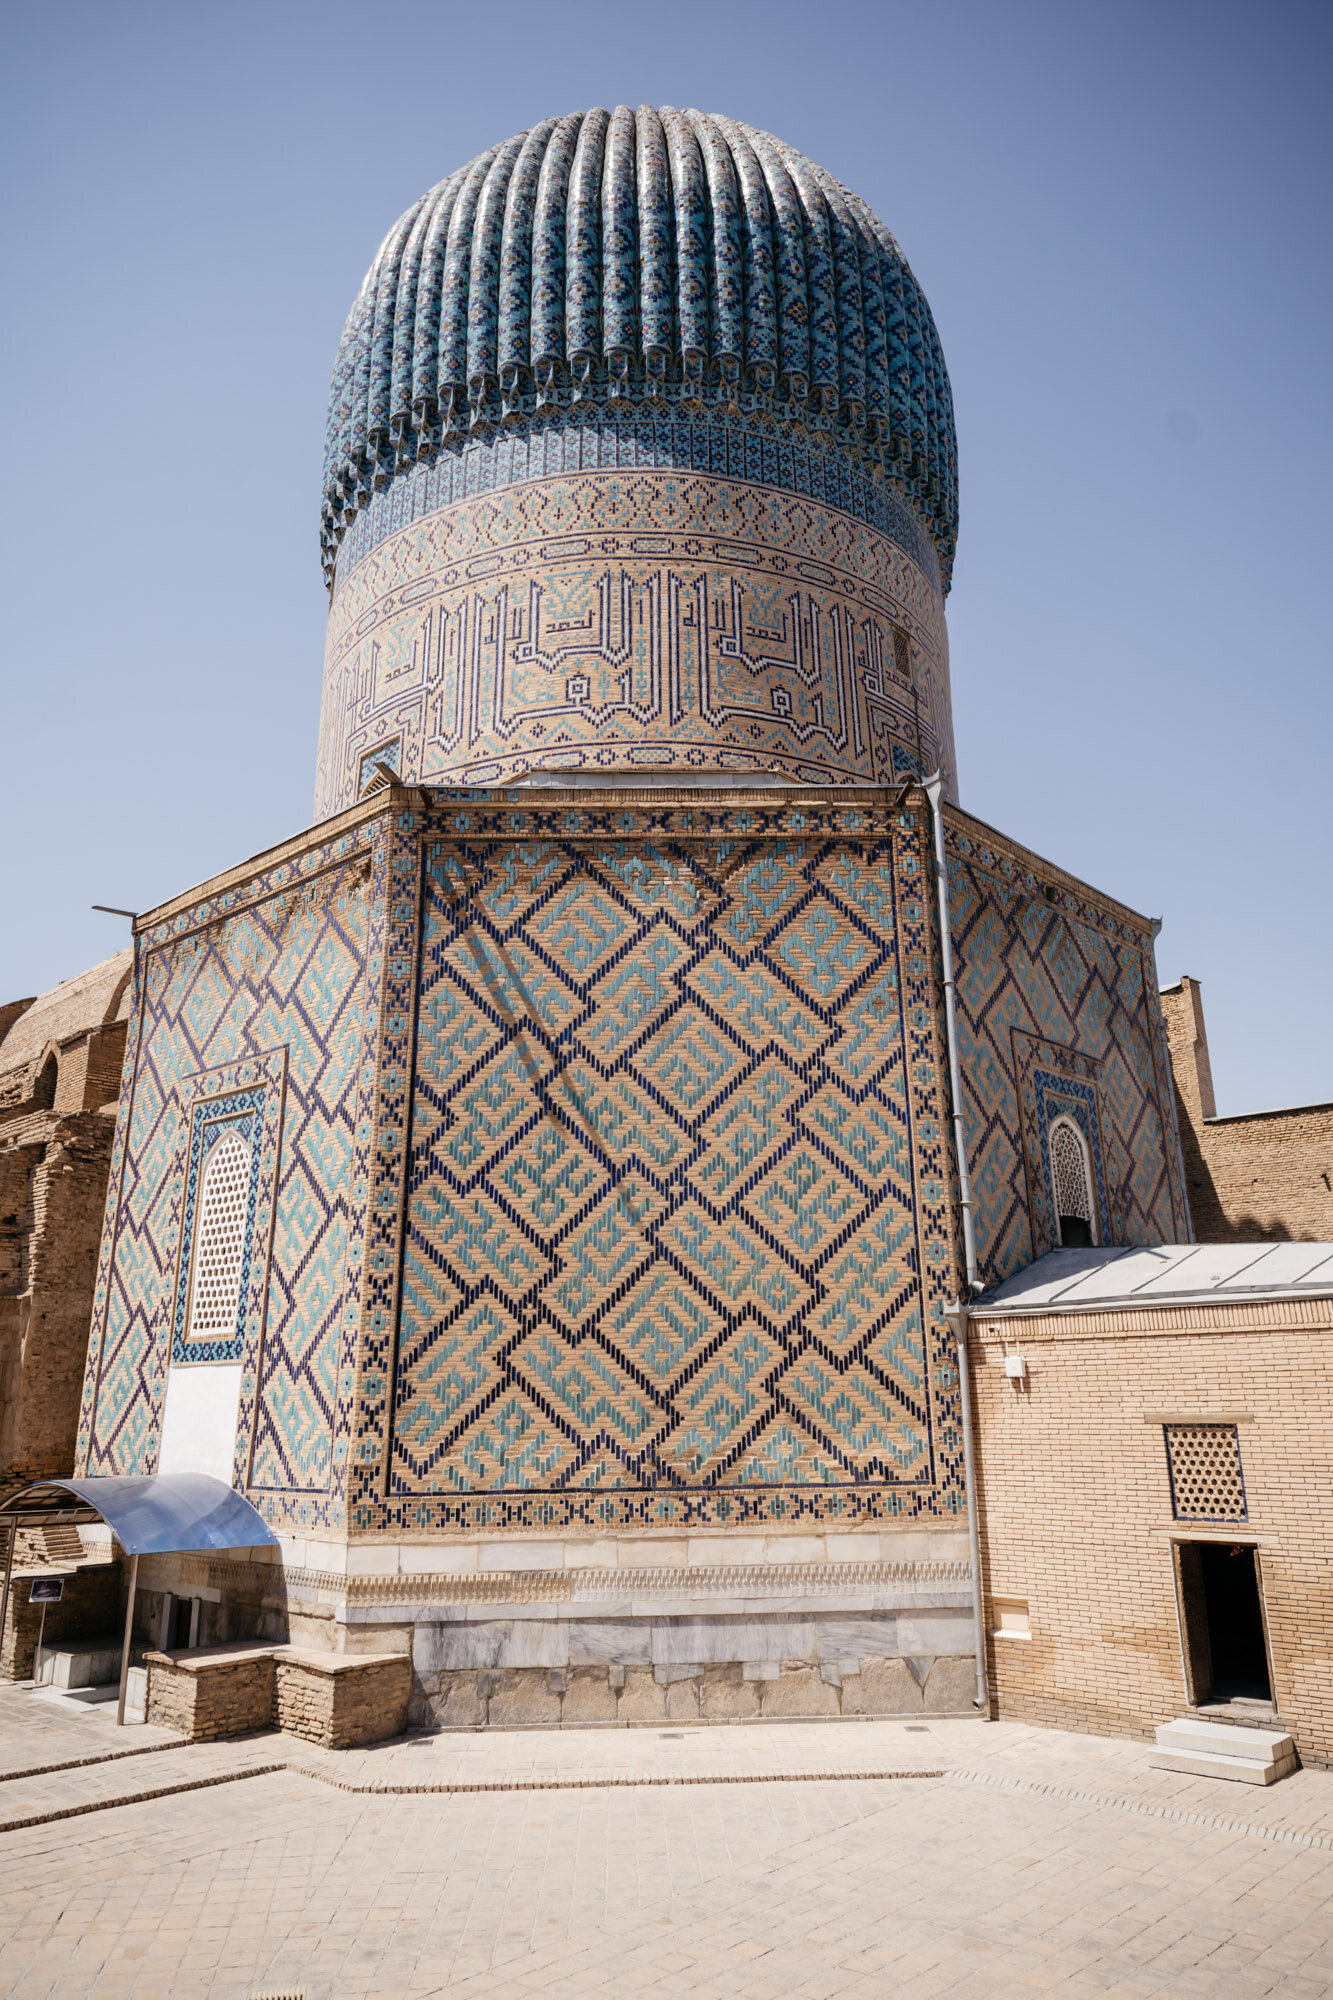  The building is covered in that immediately recognisable Timurid geometric tile work. The tiles spell out the numerous names of God. 